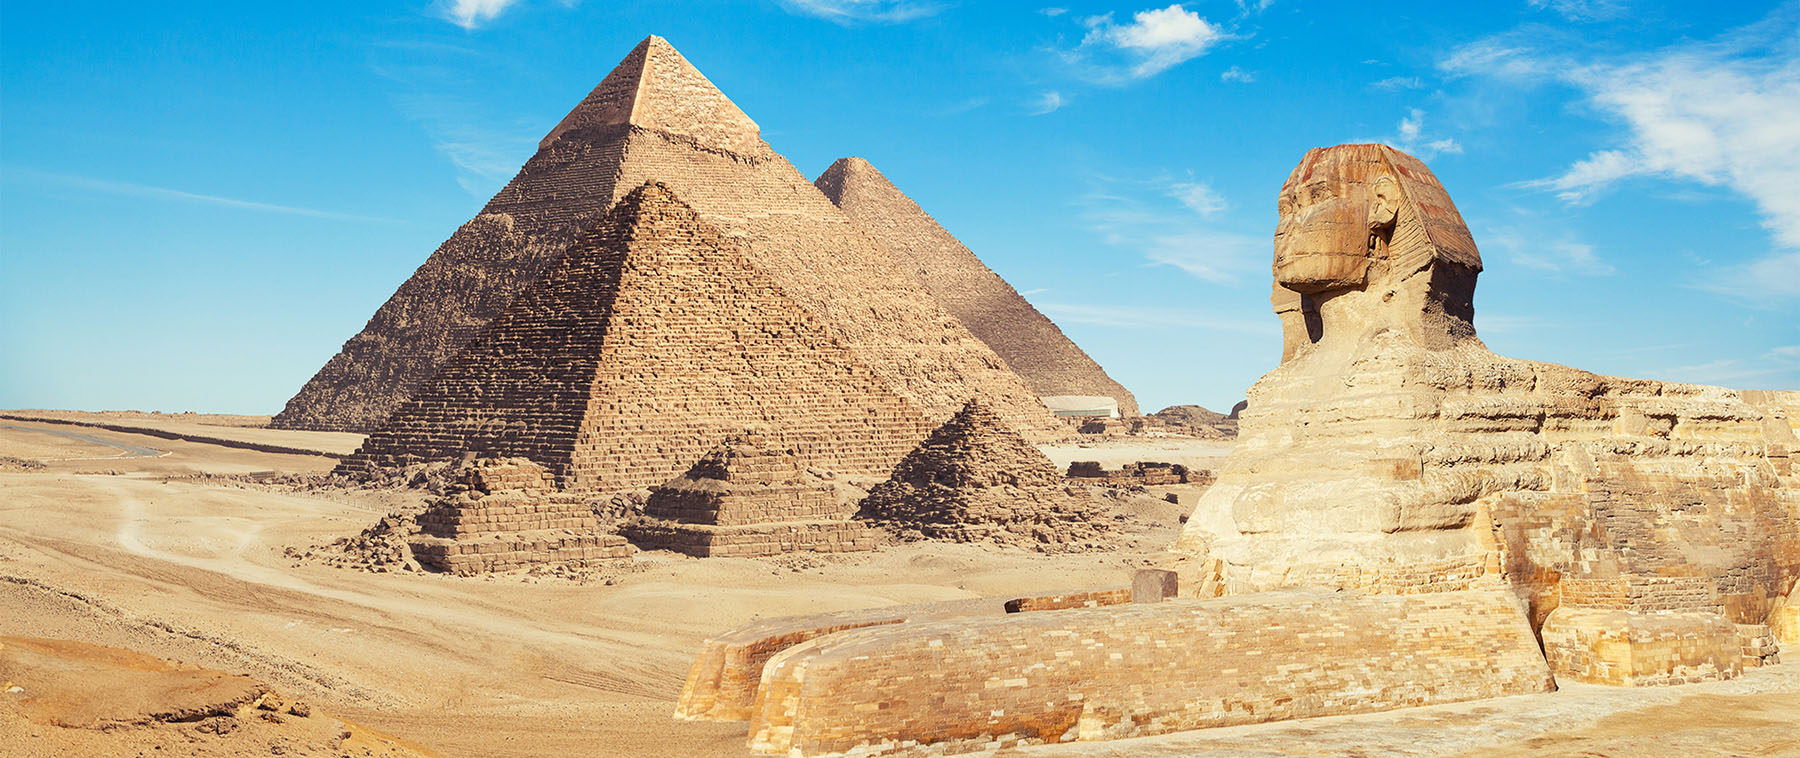 Pyramids of Giza with the Sphinx Featured